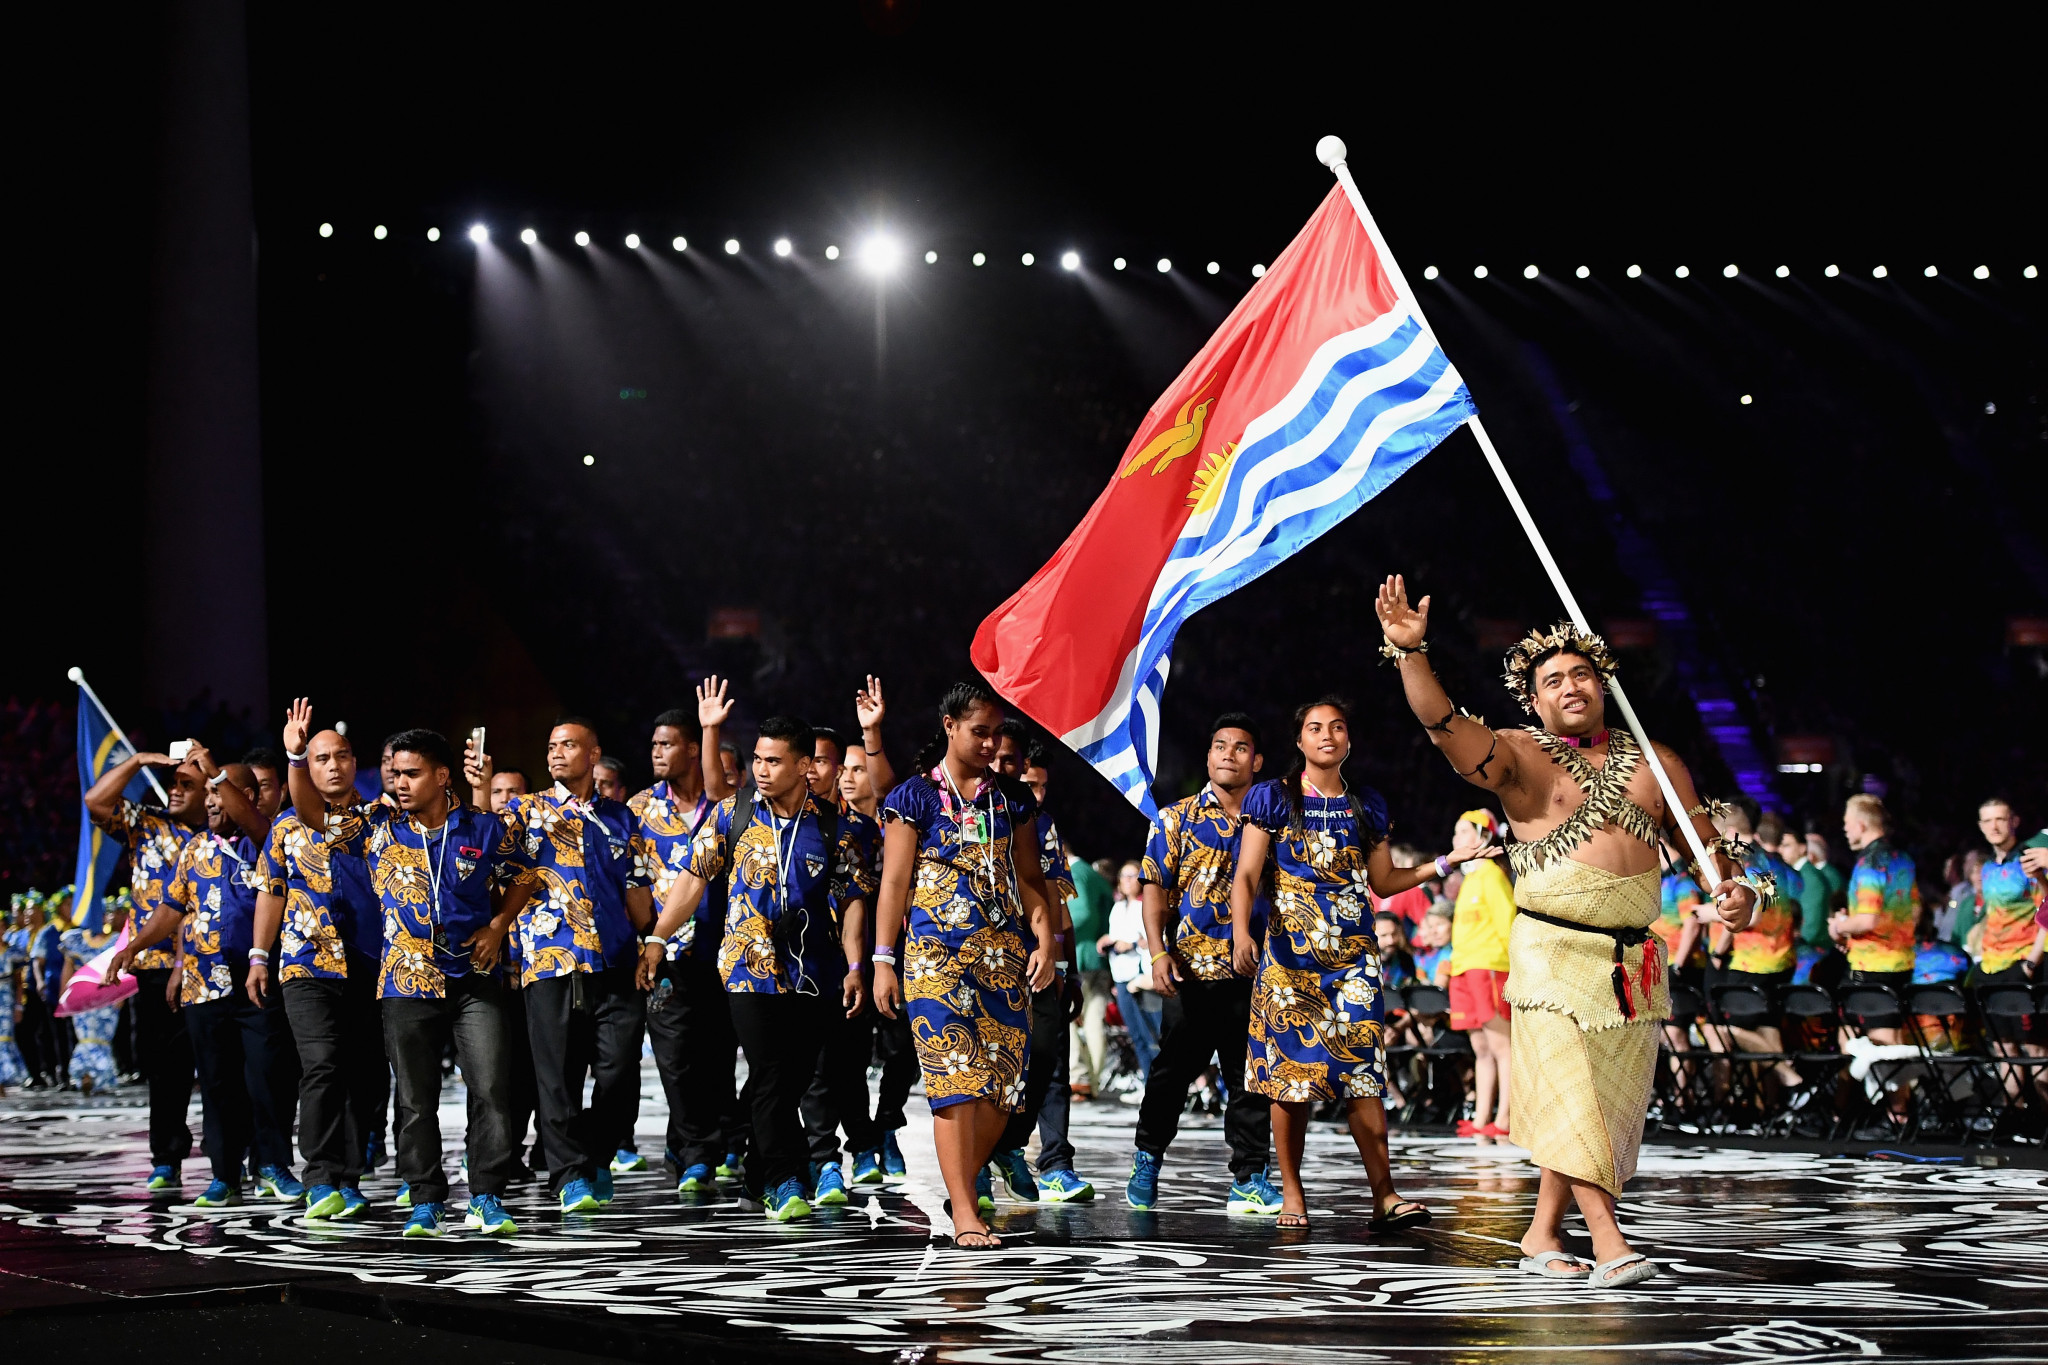 Pacific Island athletes to receive Australian support in preparation for Birmingham 2022